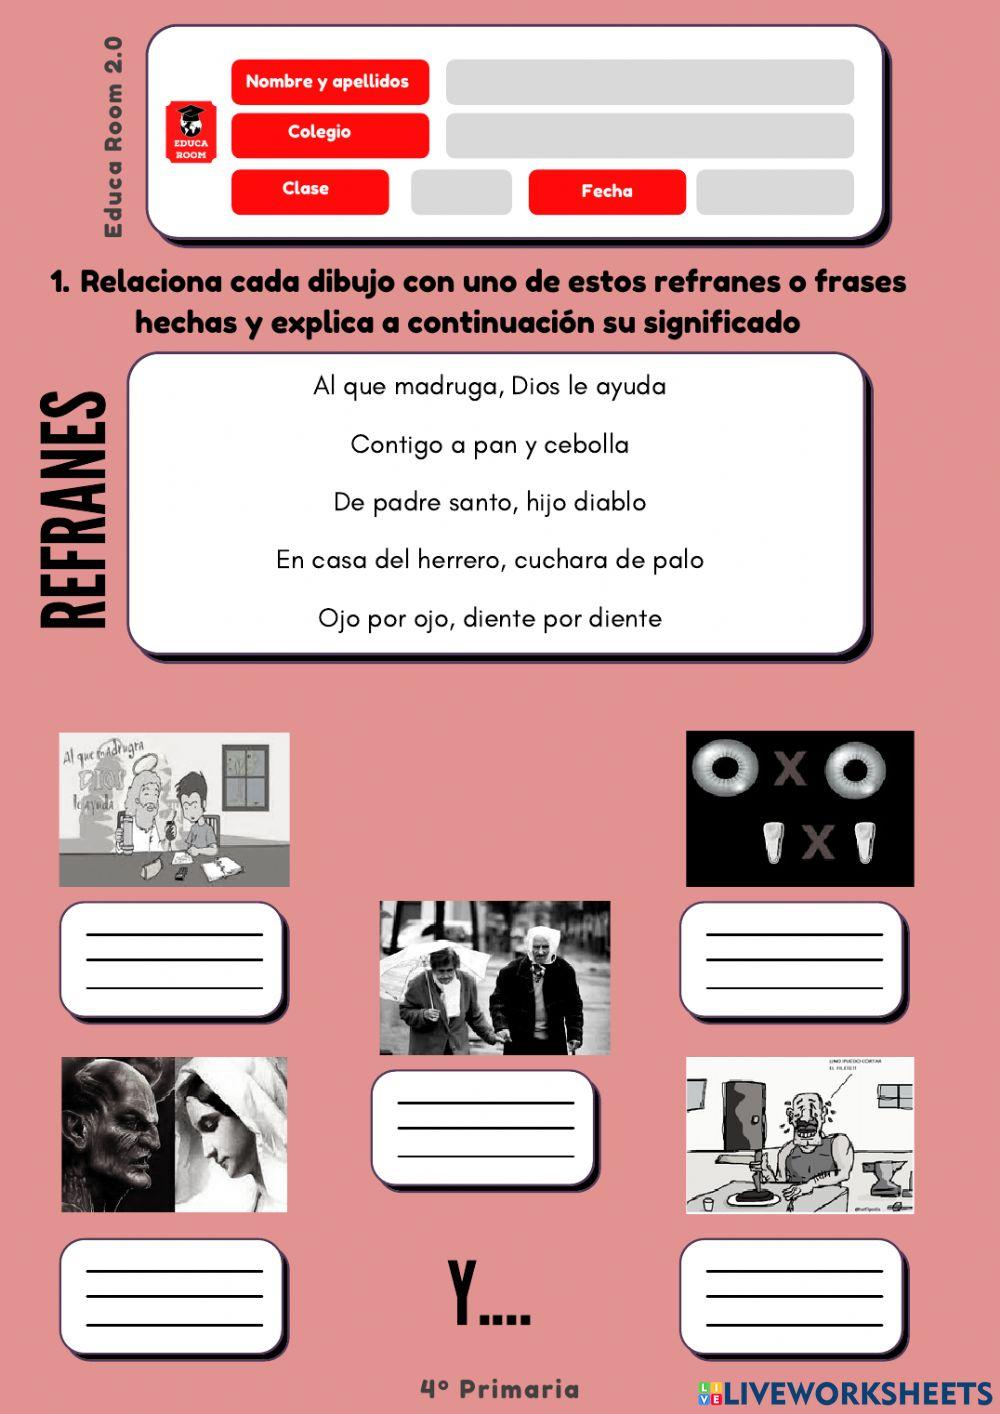 4º ud2 refranes y frases hechas lengua